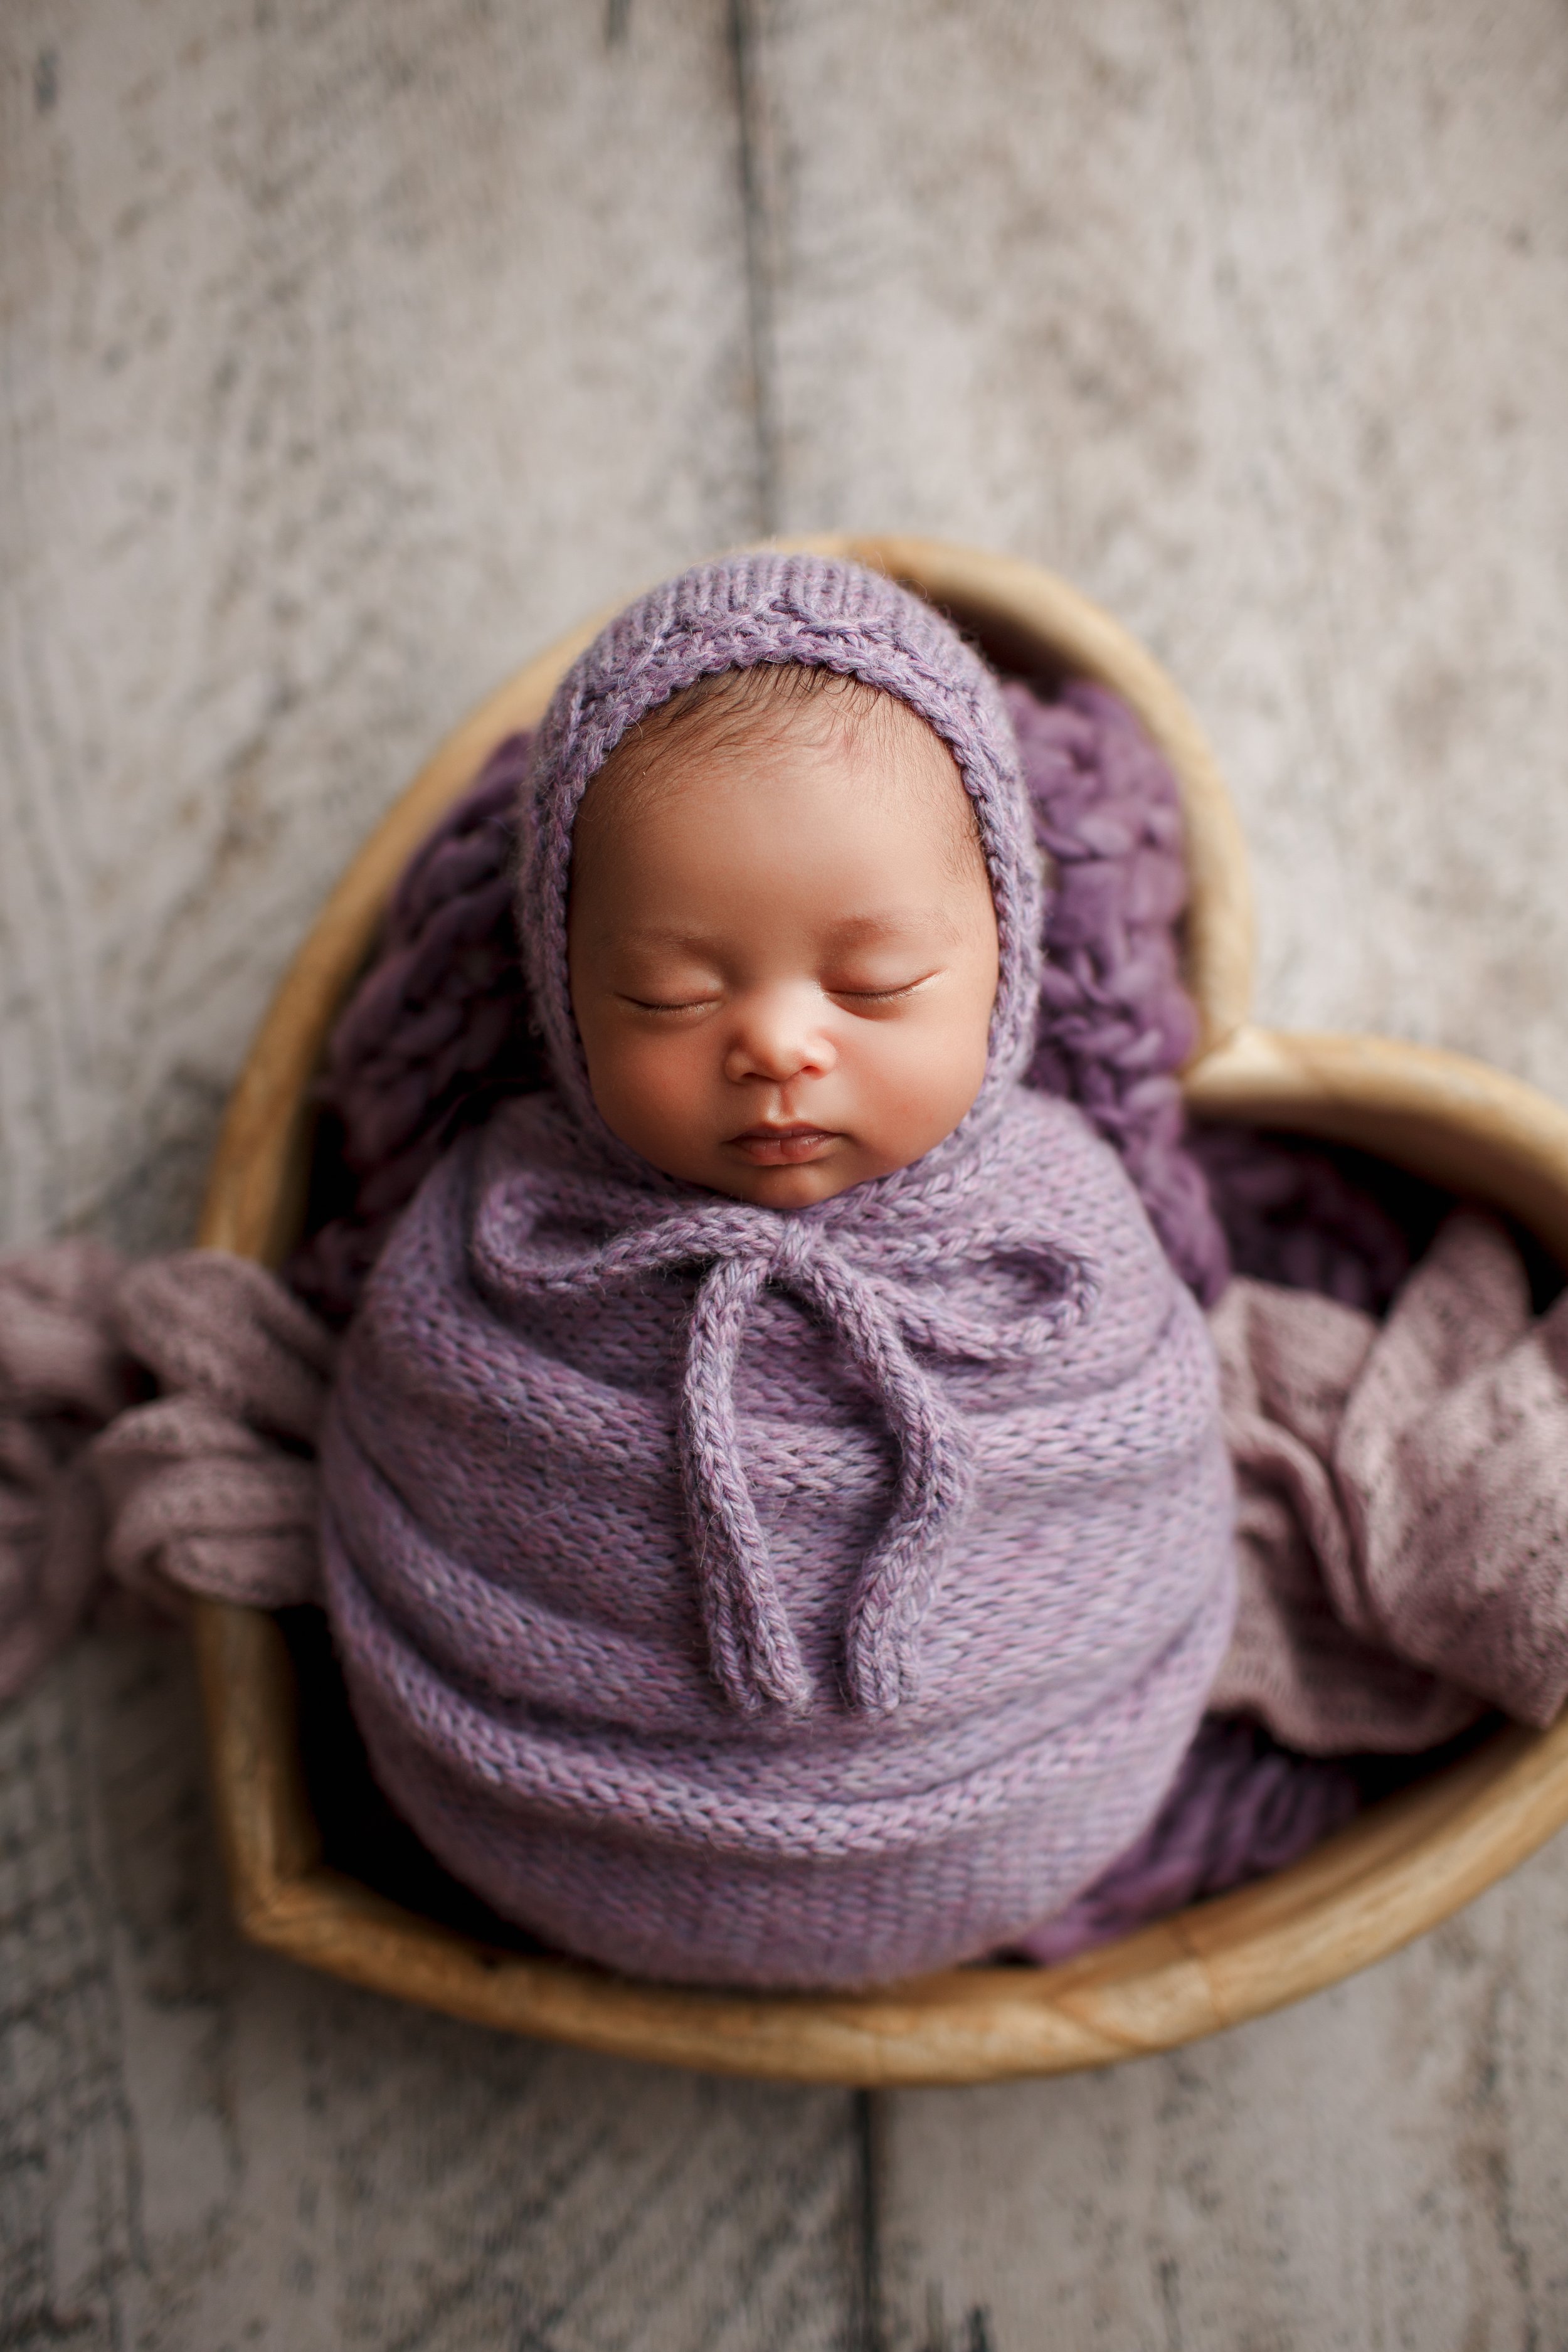  Baby in violet wrap and crochet beanie sleeps peacefully in wooden heart-shaped bowl 